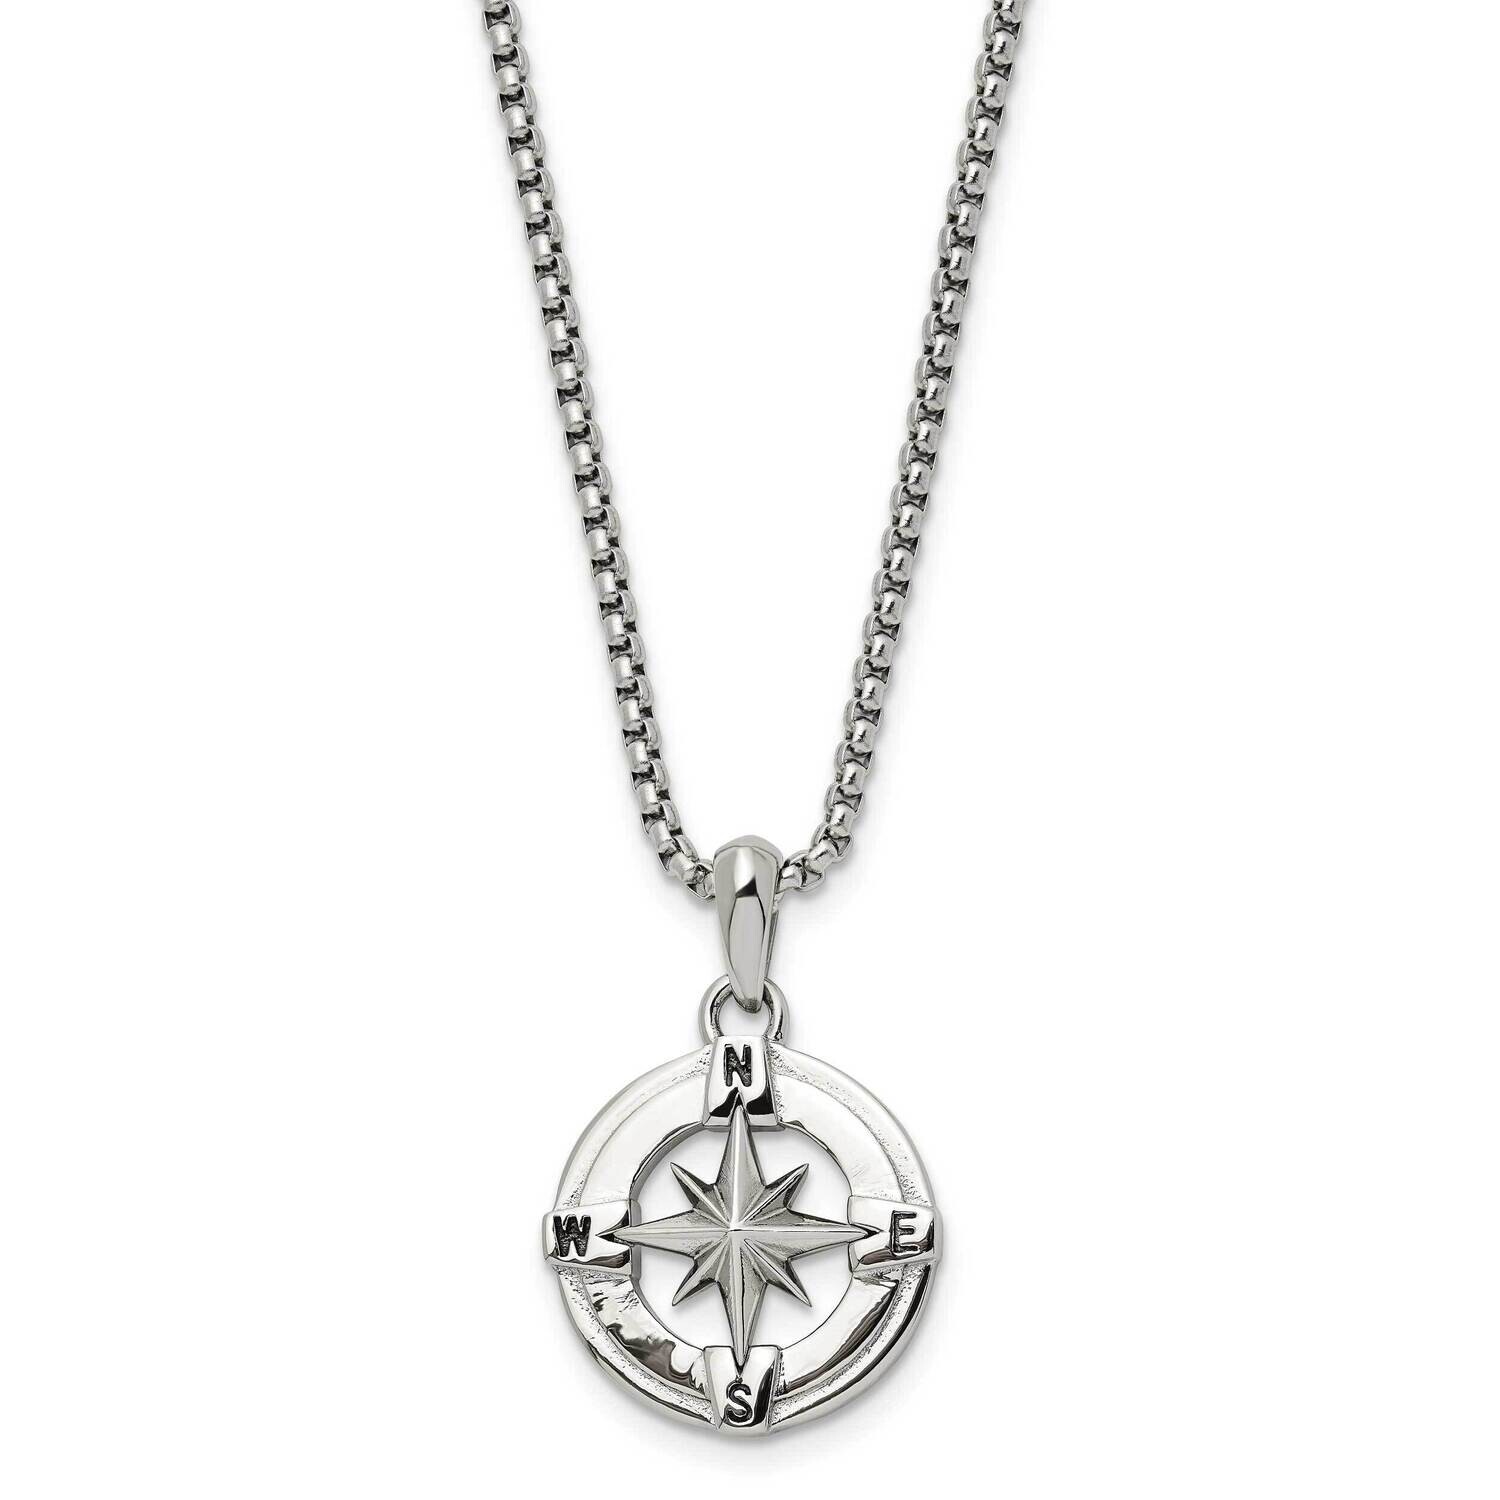 Chisel Polished Compass Pendant On A 22 Inch Box Chain Necklace Stainless Steel SRN3075-22